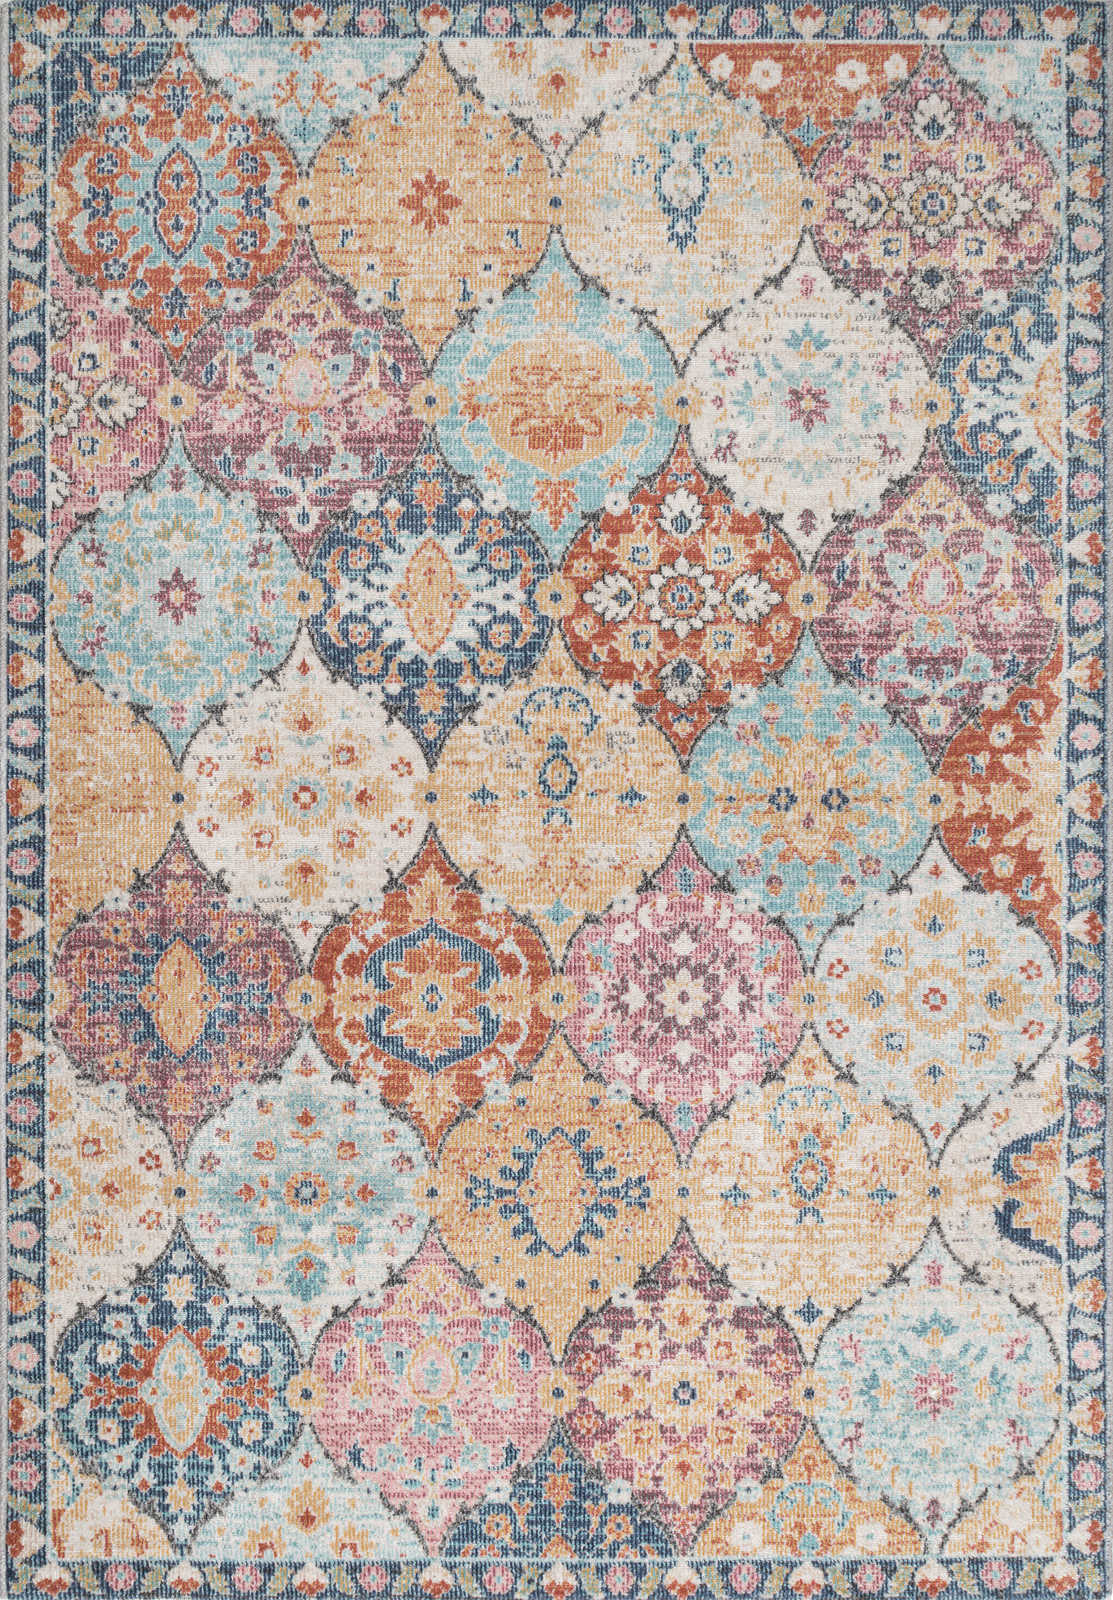             Colourful Flatweave Outdoor Rug - 150 x 80 cm
        